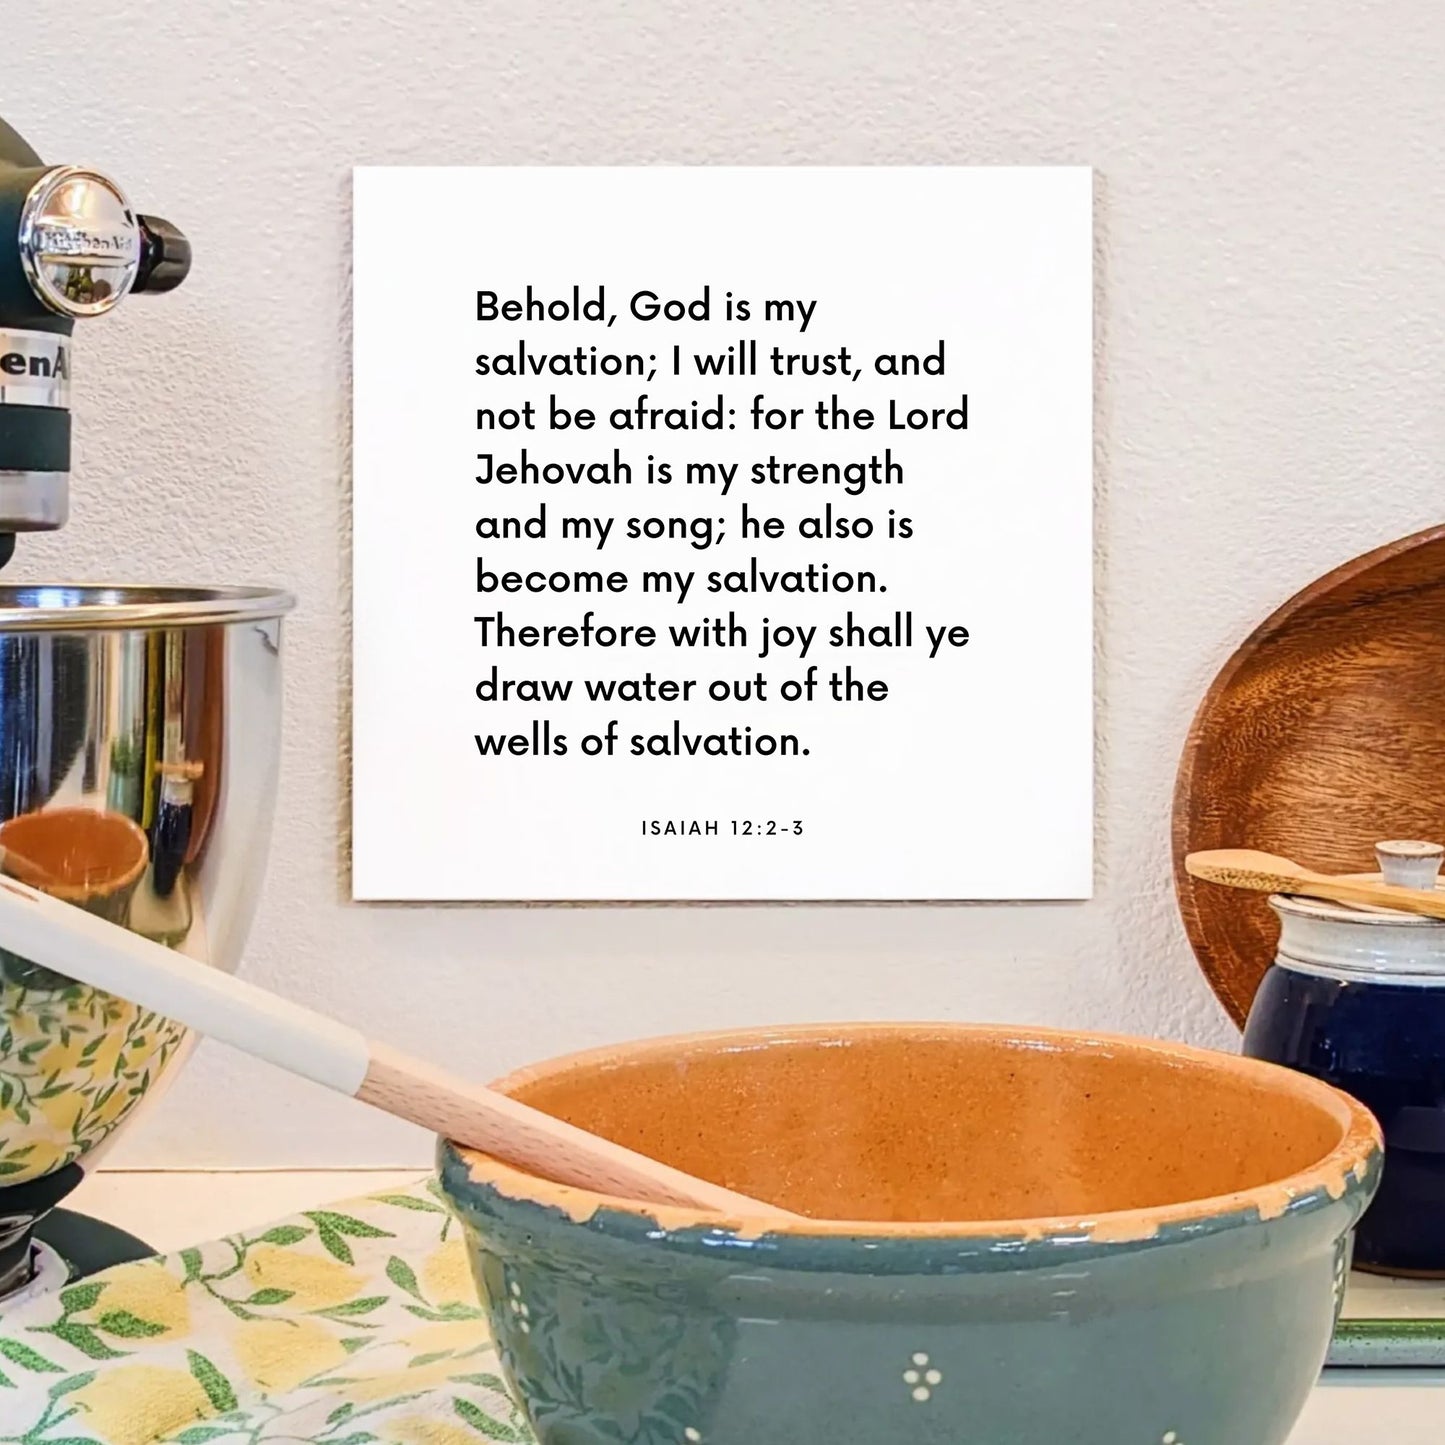 Kitchen mouting of the scripture tile for Isaiah 12:2-3 - "The Lord Jehovah is my strength and my song"